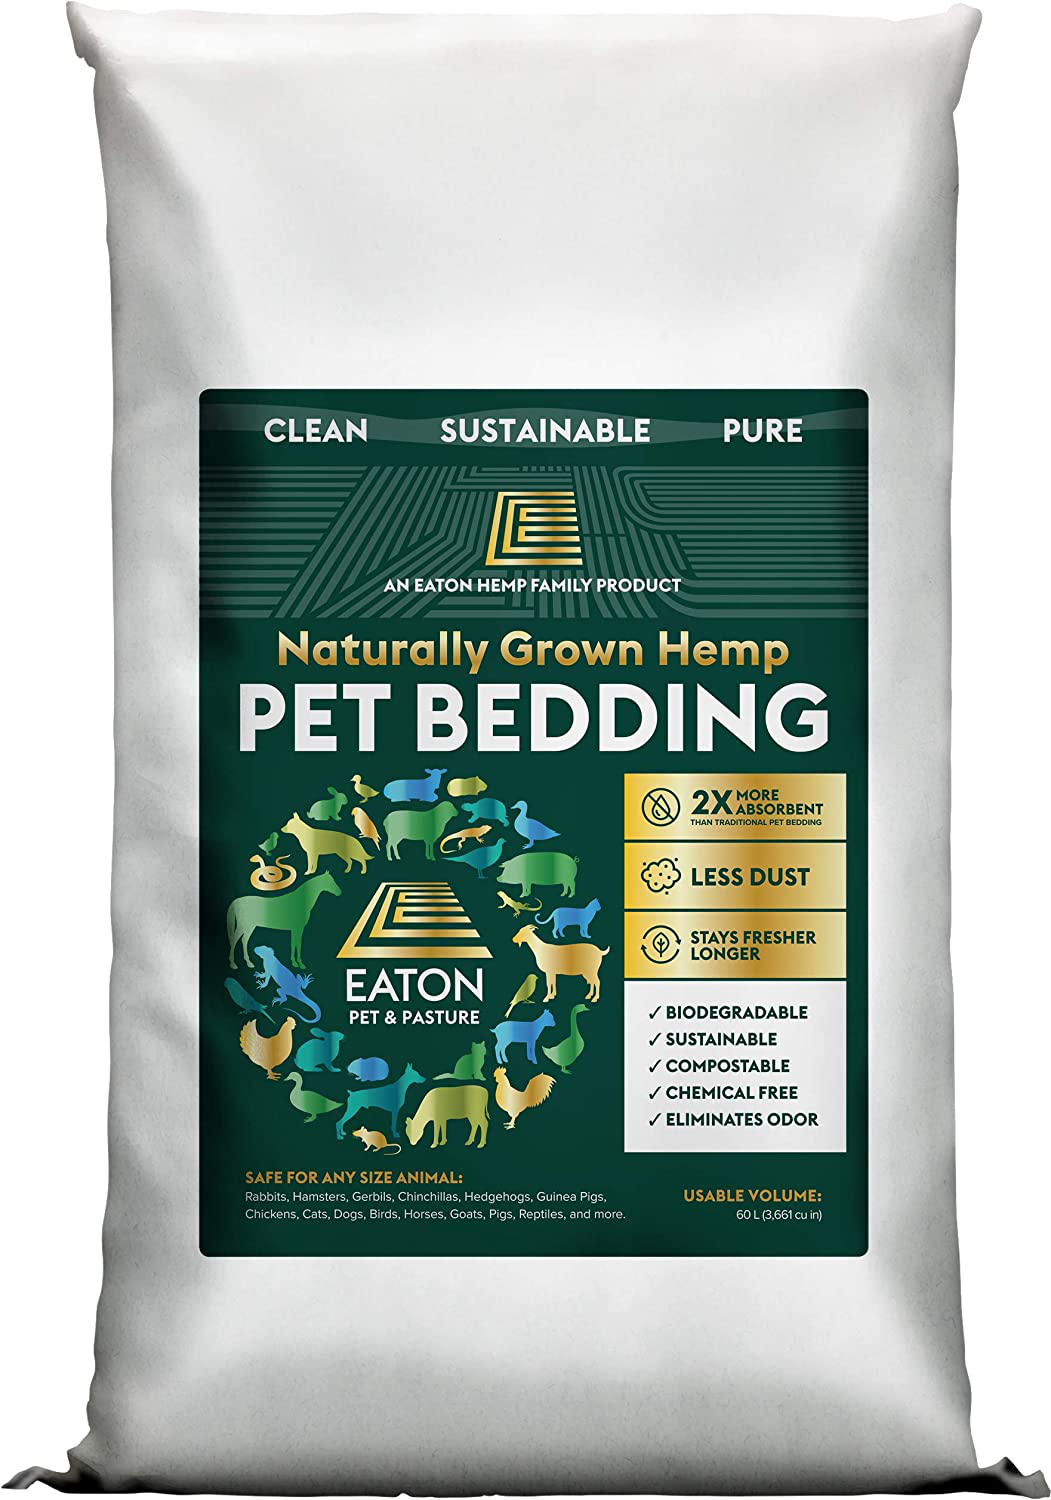 Eaton Pet and Pasture, Naturally Grown Hemp Pet Bedding for Chicken Coop, Nesting Boxes, Rabbits, Hamsters, Small Pets, Horses, Highly Absorbent and Hypoallergenic, Eco-Friendly, Farmer Owned